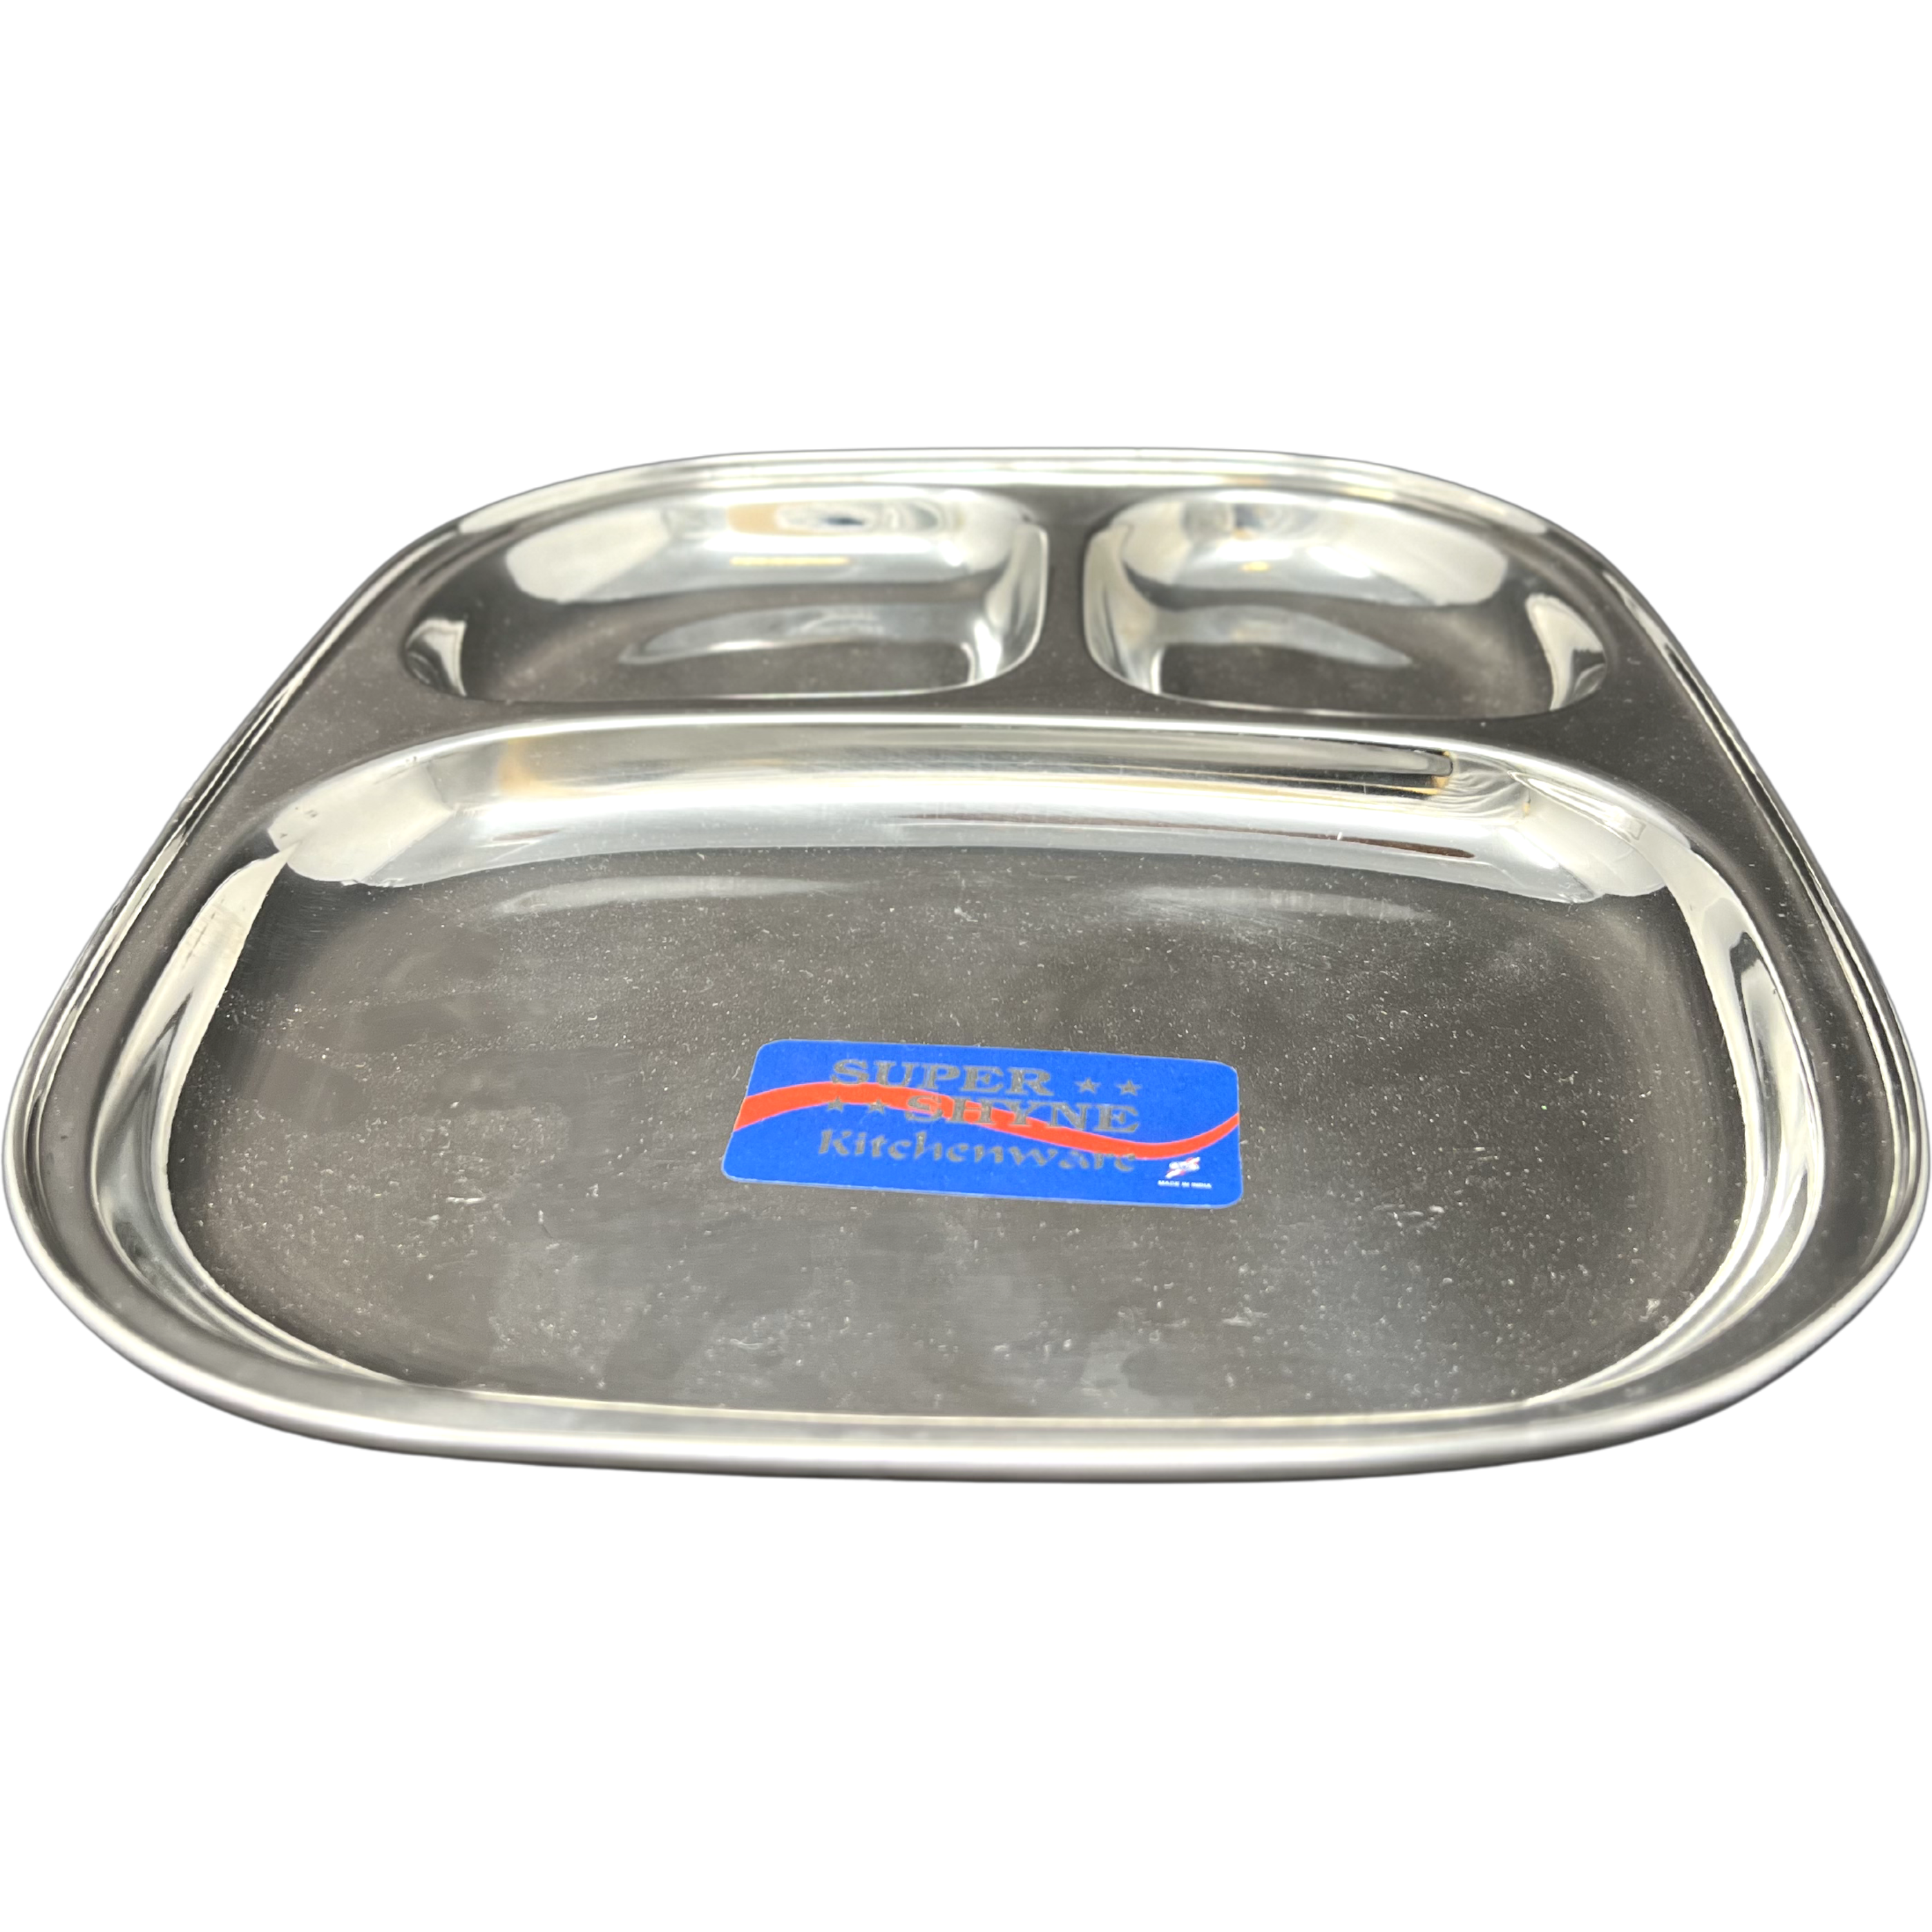 Case of 6 - Super Shyne Stainless Steel 3 Section Rectangular Lunch Tray - 10.75 Inch X 9.5 Inch